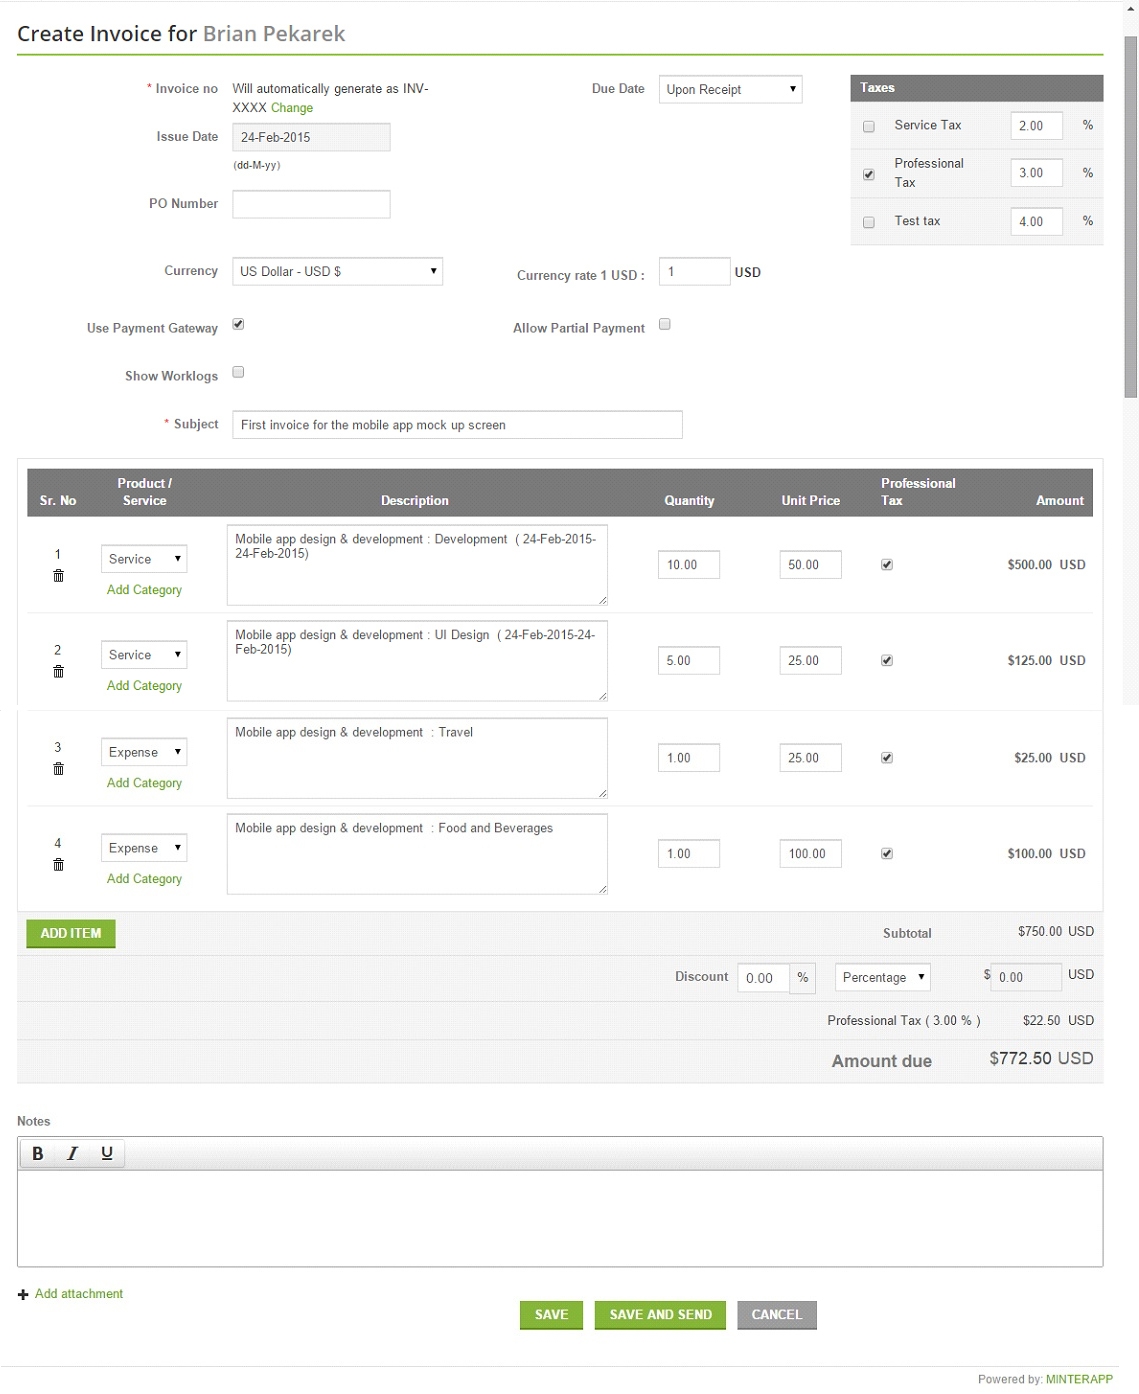 online invoicing is made simple and faster with minterapp invoice numbering system